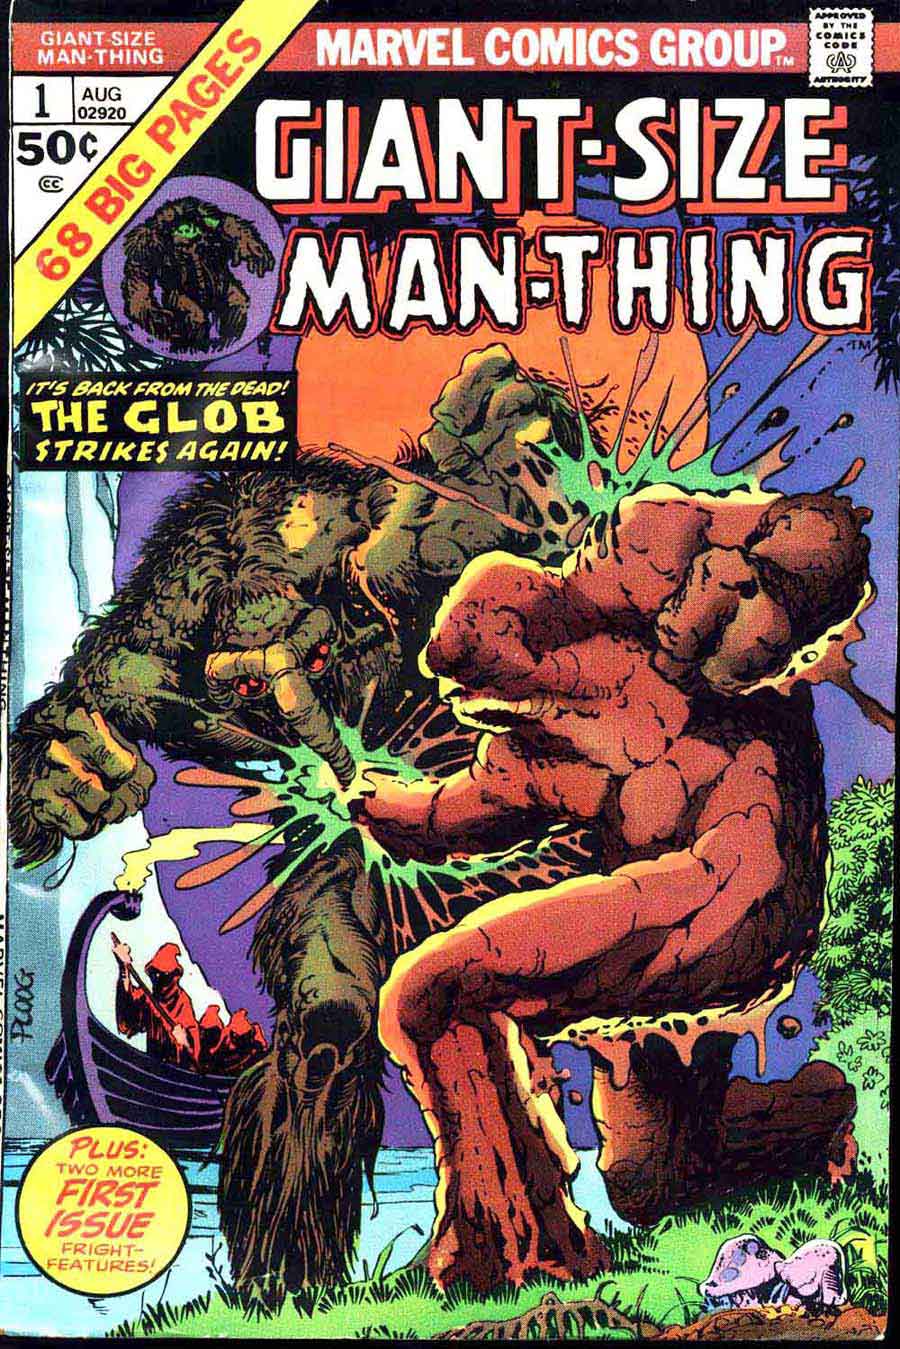 Giant-size Man-Thing v1 #1 marvel 1970s bronze age comic book cover art by Mike Ploog art